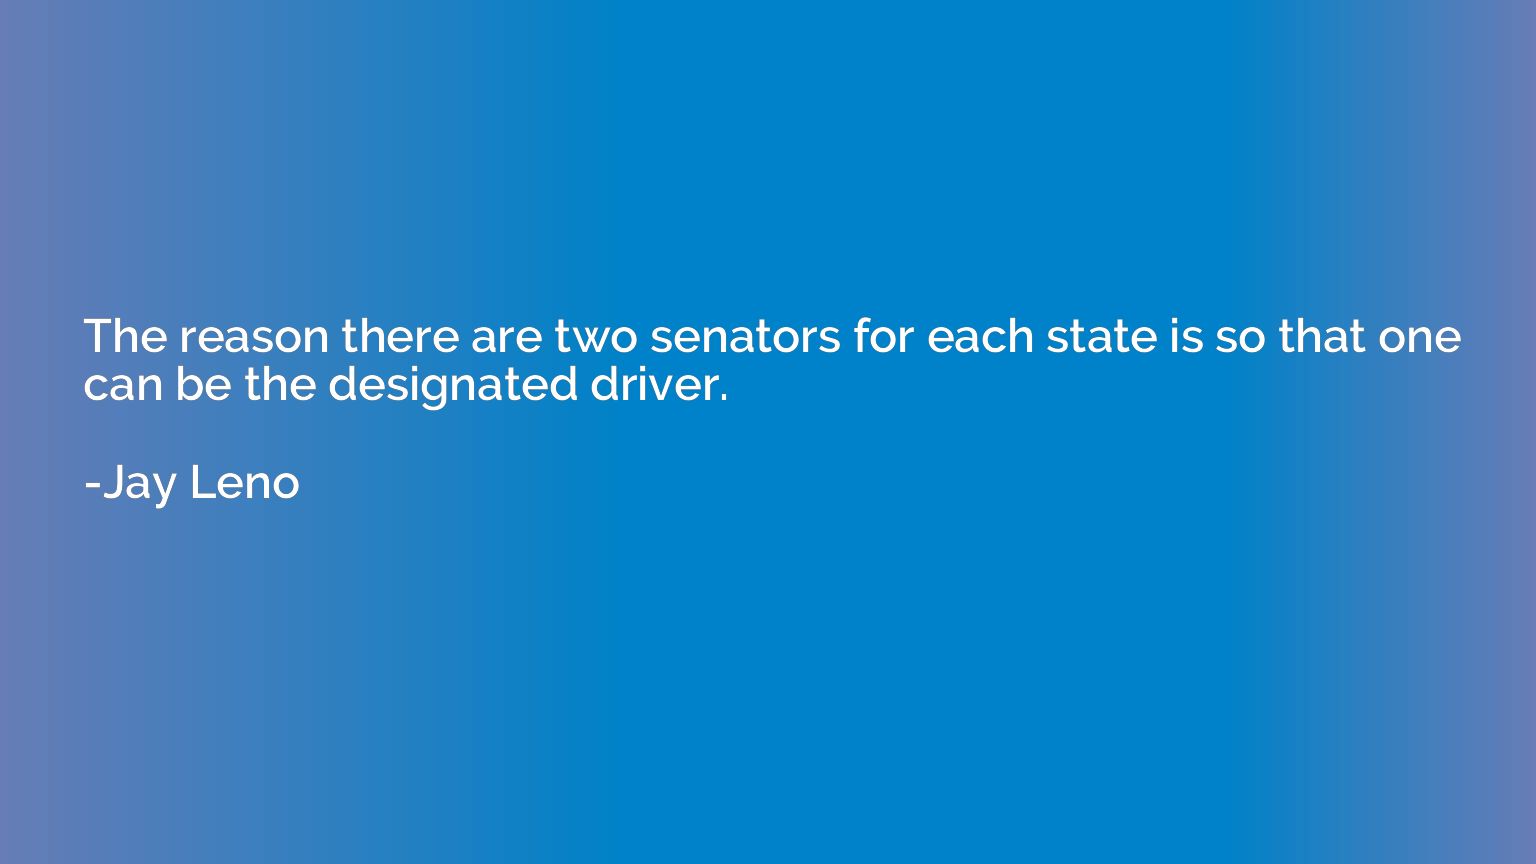 The reason there are two senators for each state is so that 